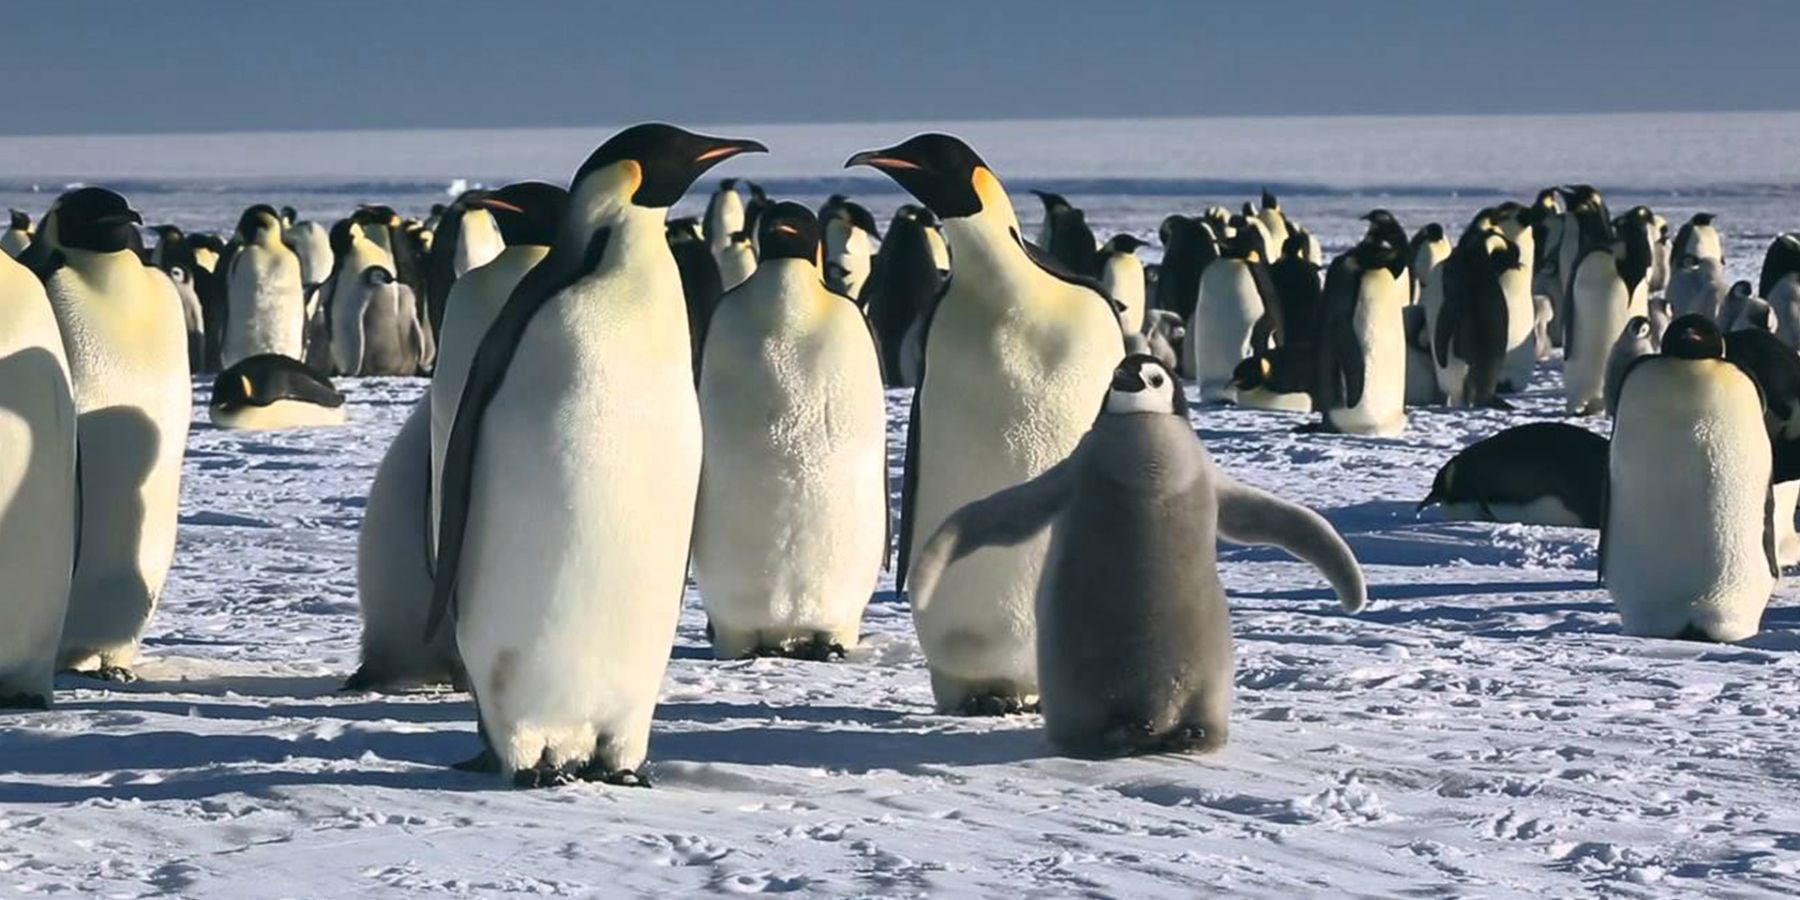 A flock of Penguins gather in the snow in the documentary March of the Penguins (1)